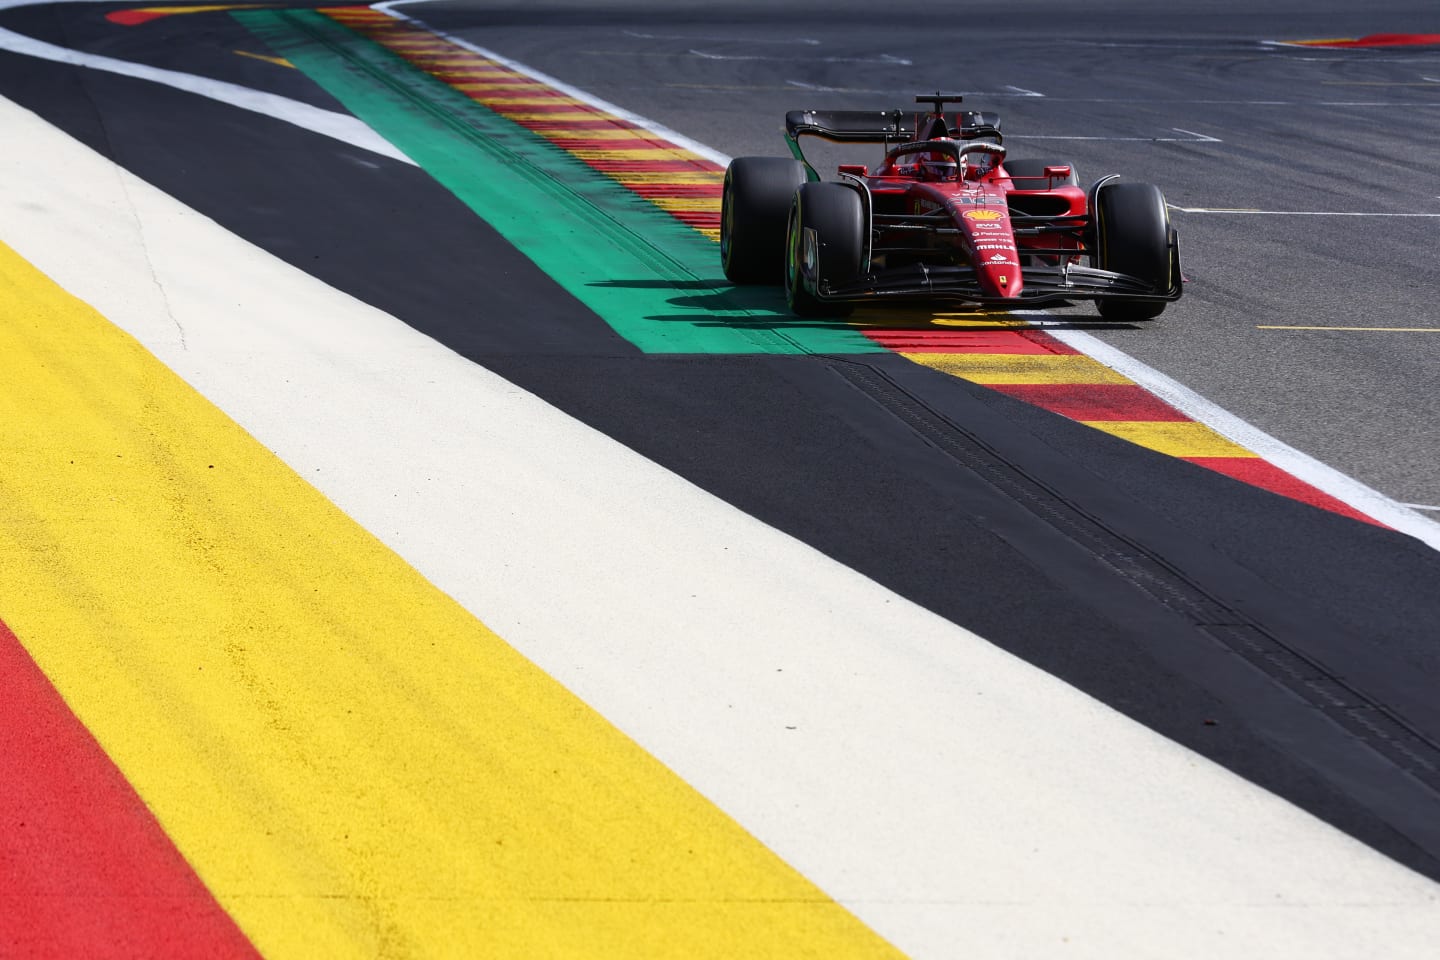 SPA, BELGIUM - AUGUST 28: Charles Leclerc of Monaco driving the (16) Ferrari F1-75 on track during the F1 Grand Prix of Belgium at Circuit de Spa-Francorchamps on August 28, 2022 in Spa, Belgium. (Photo by Mark Thompson/Getty Images)